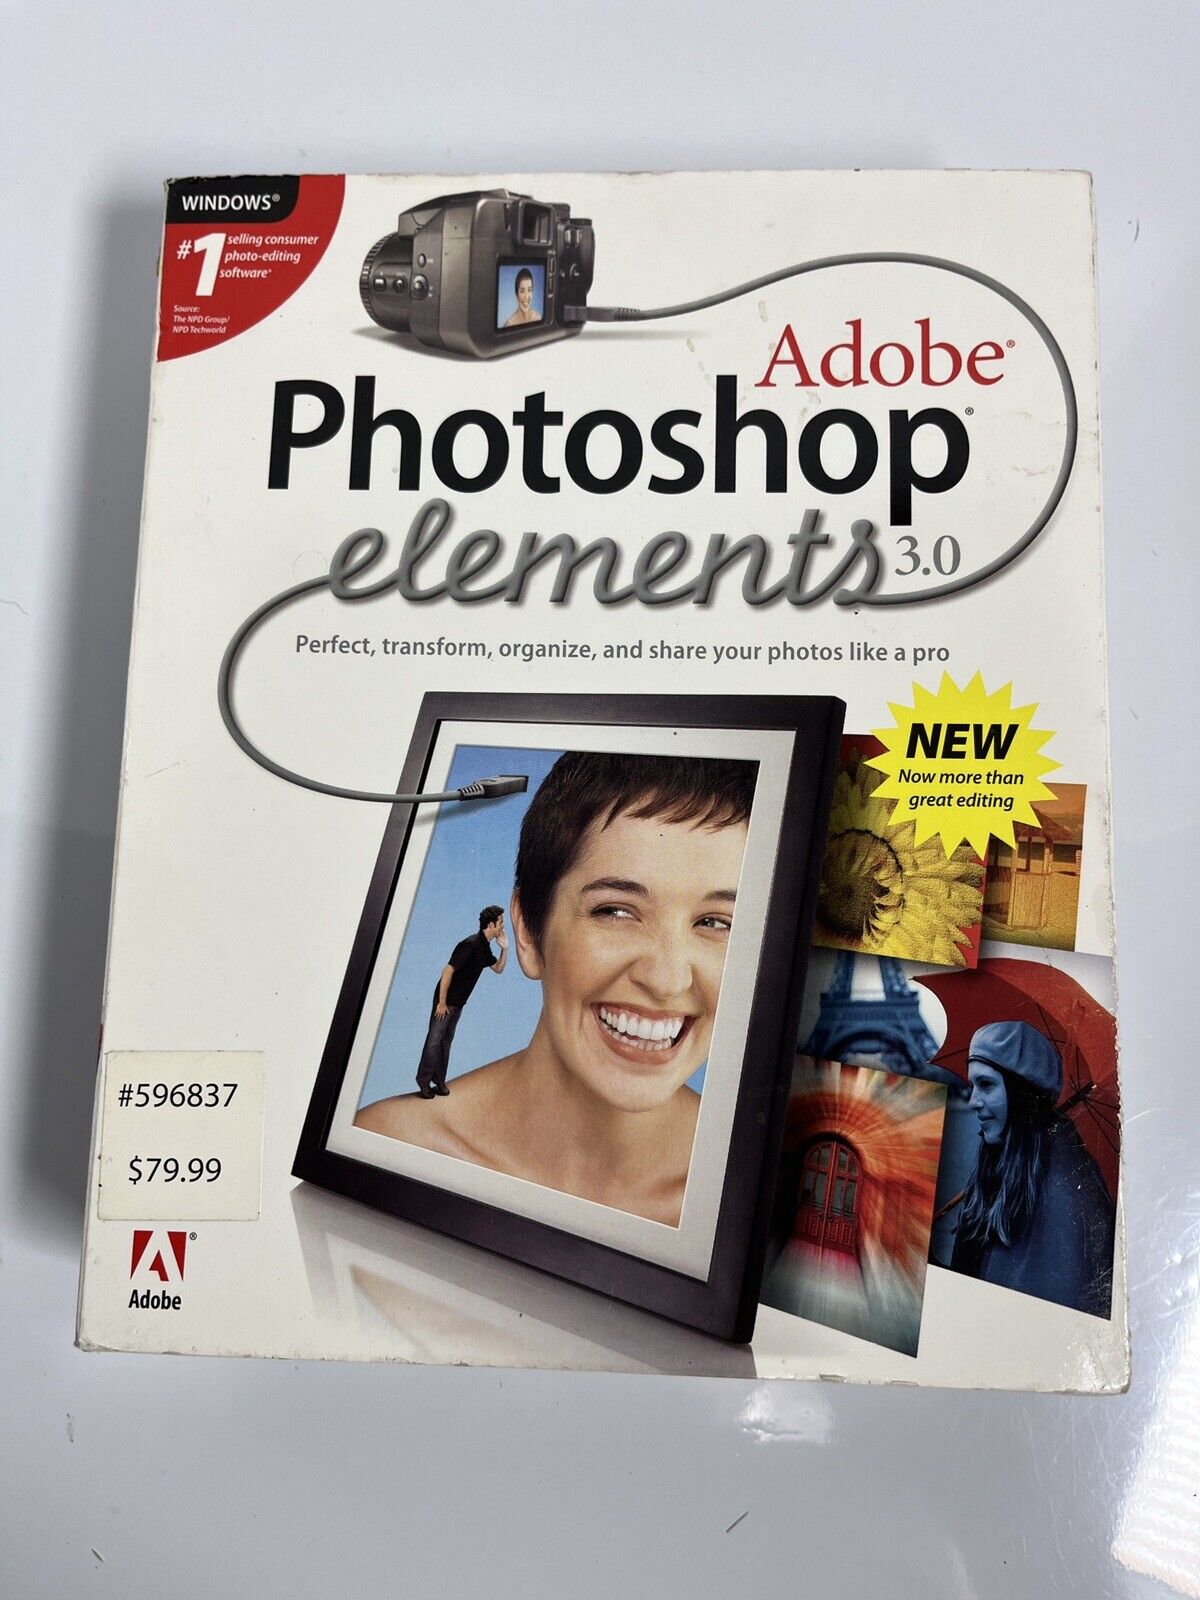 Adobe Photoshop Elements 3.0  - New Factory Sealed in Box - Win XP